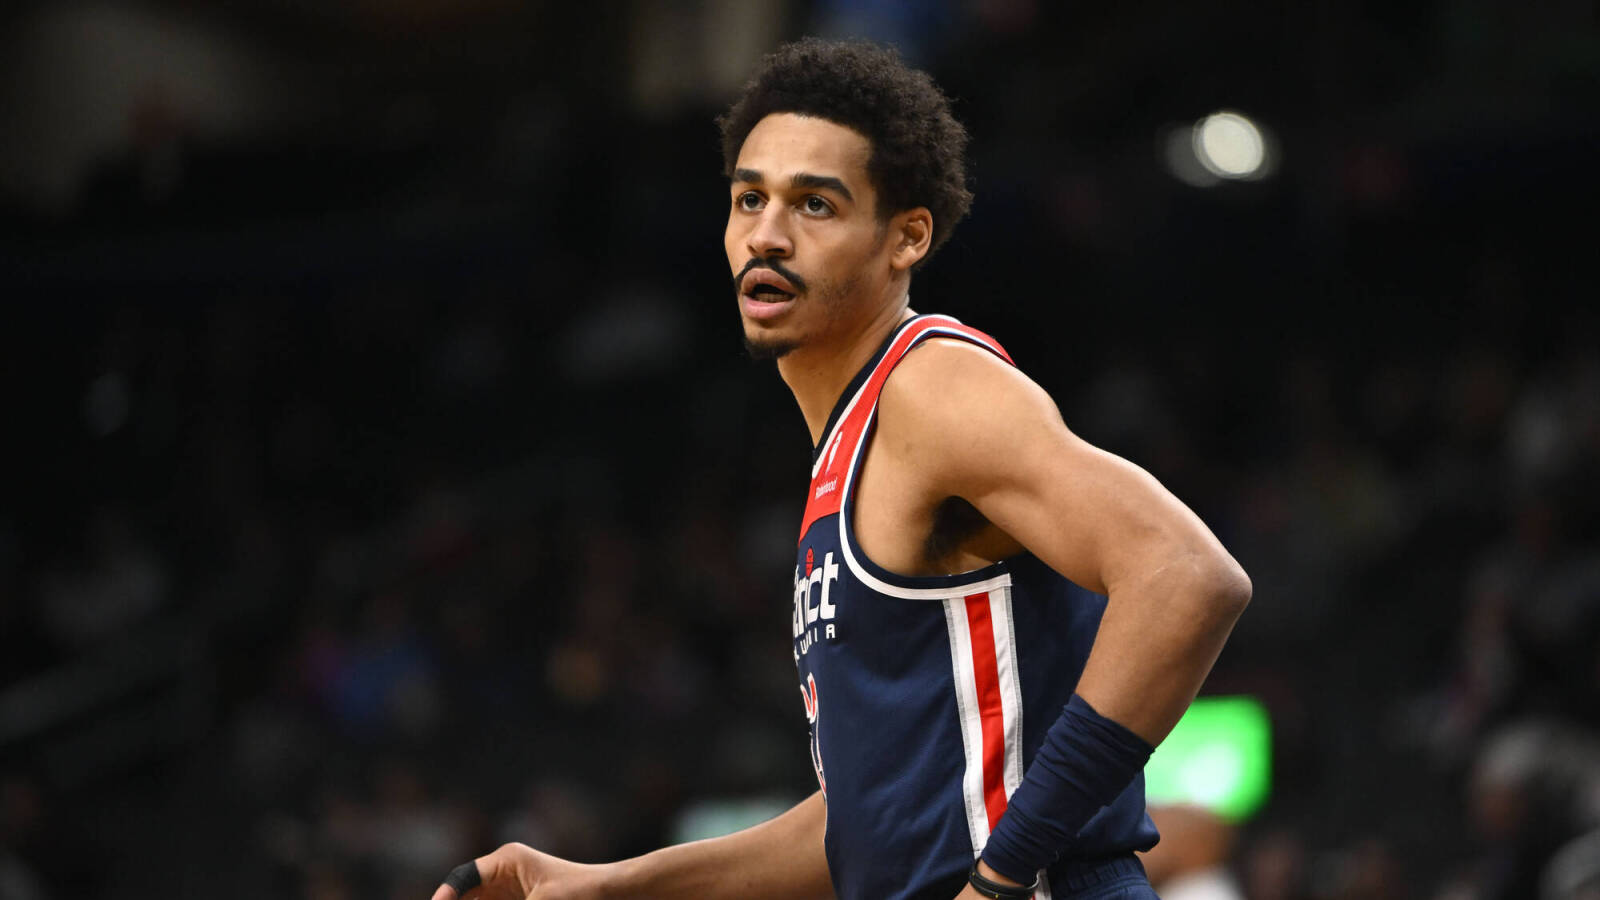 Jordan Poole's struggles make his contract one of the worst in the NBA